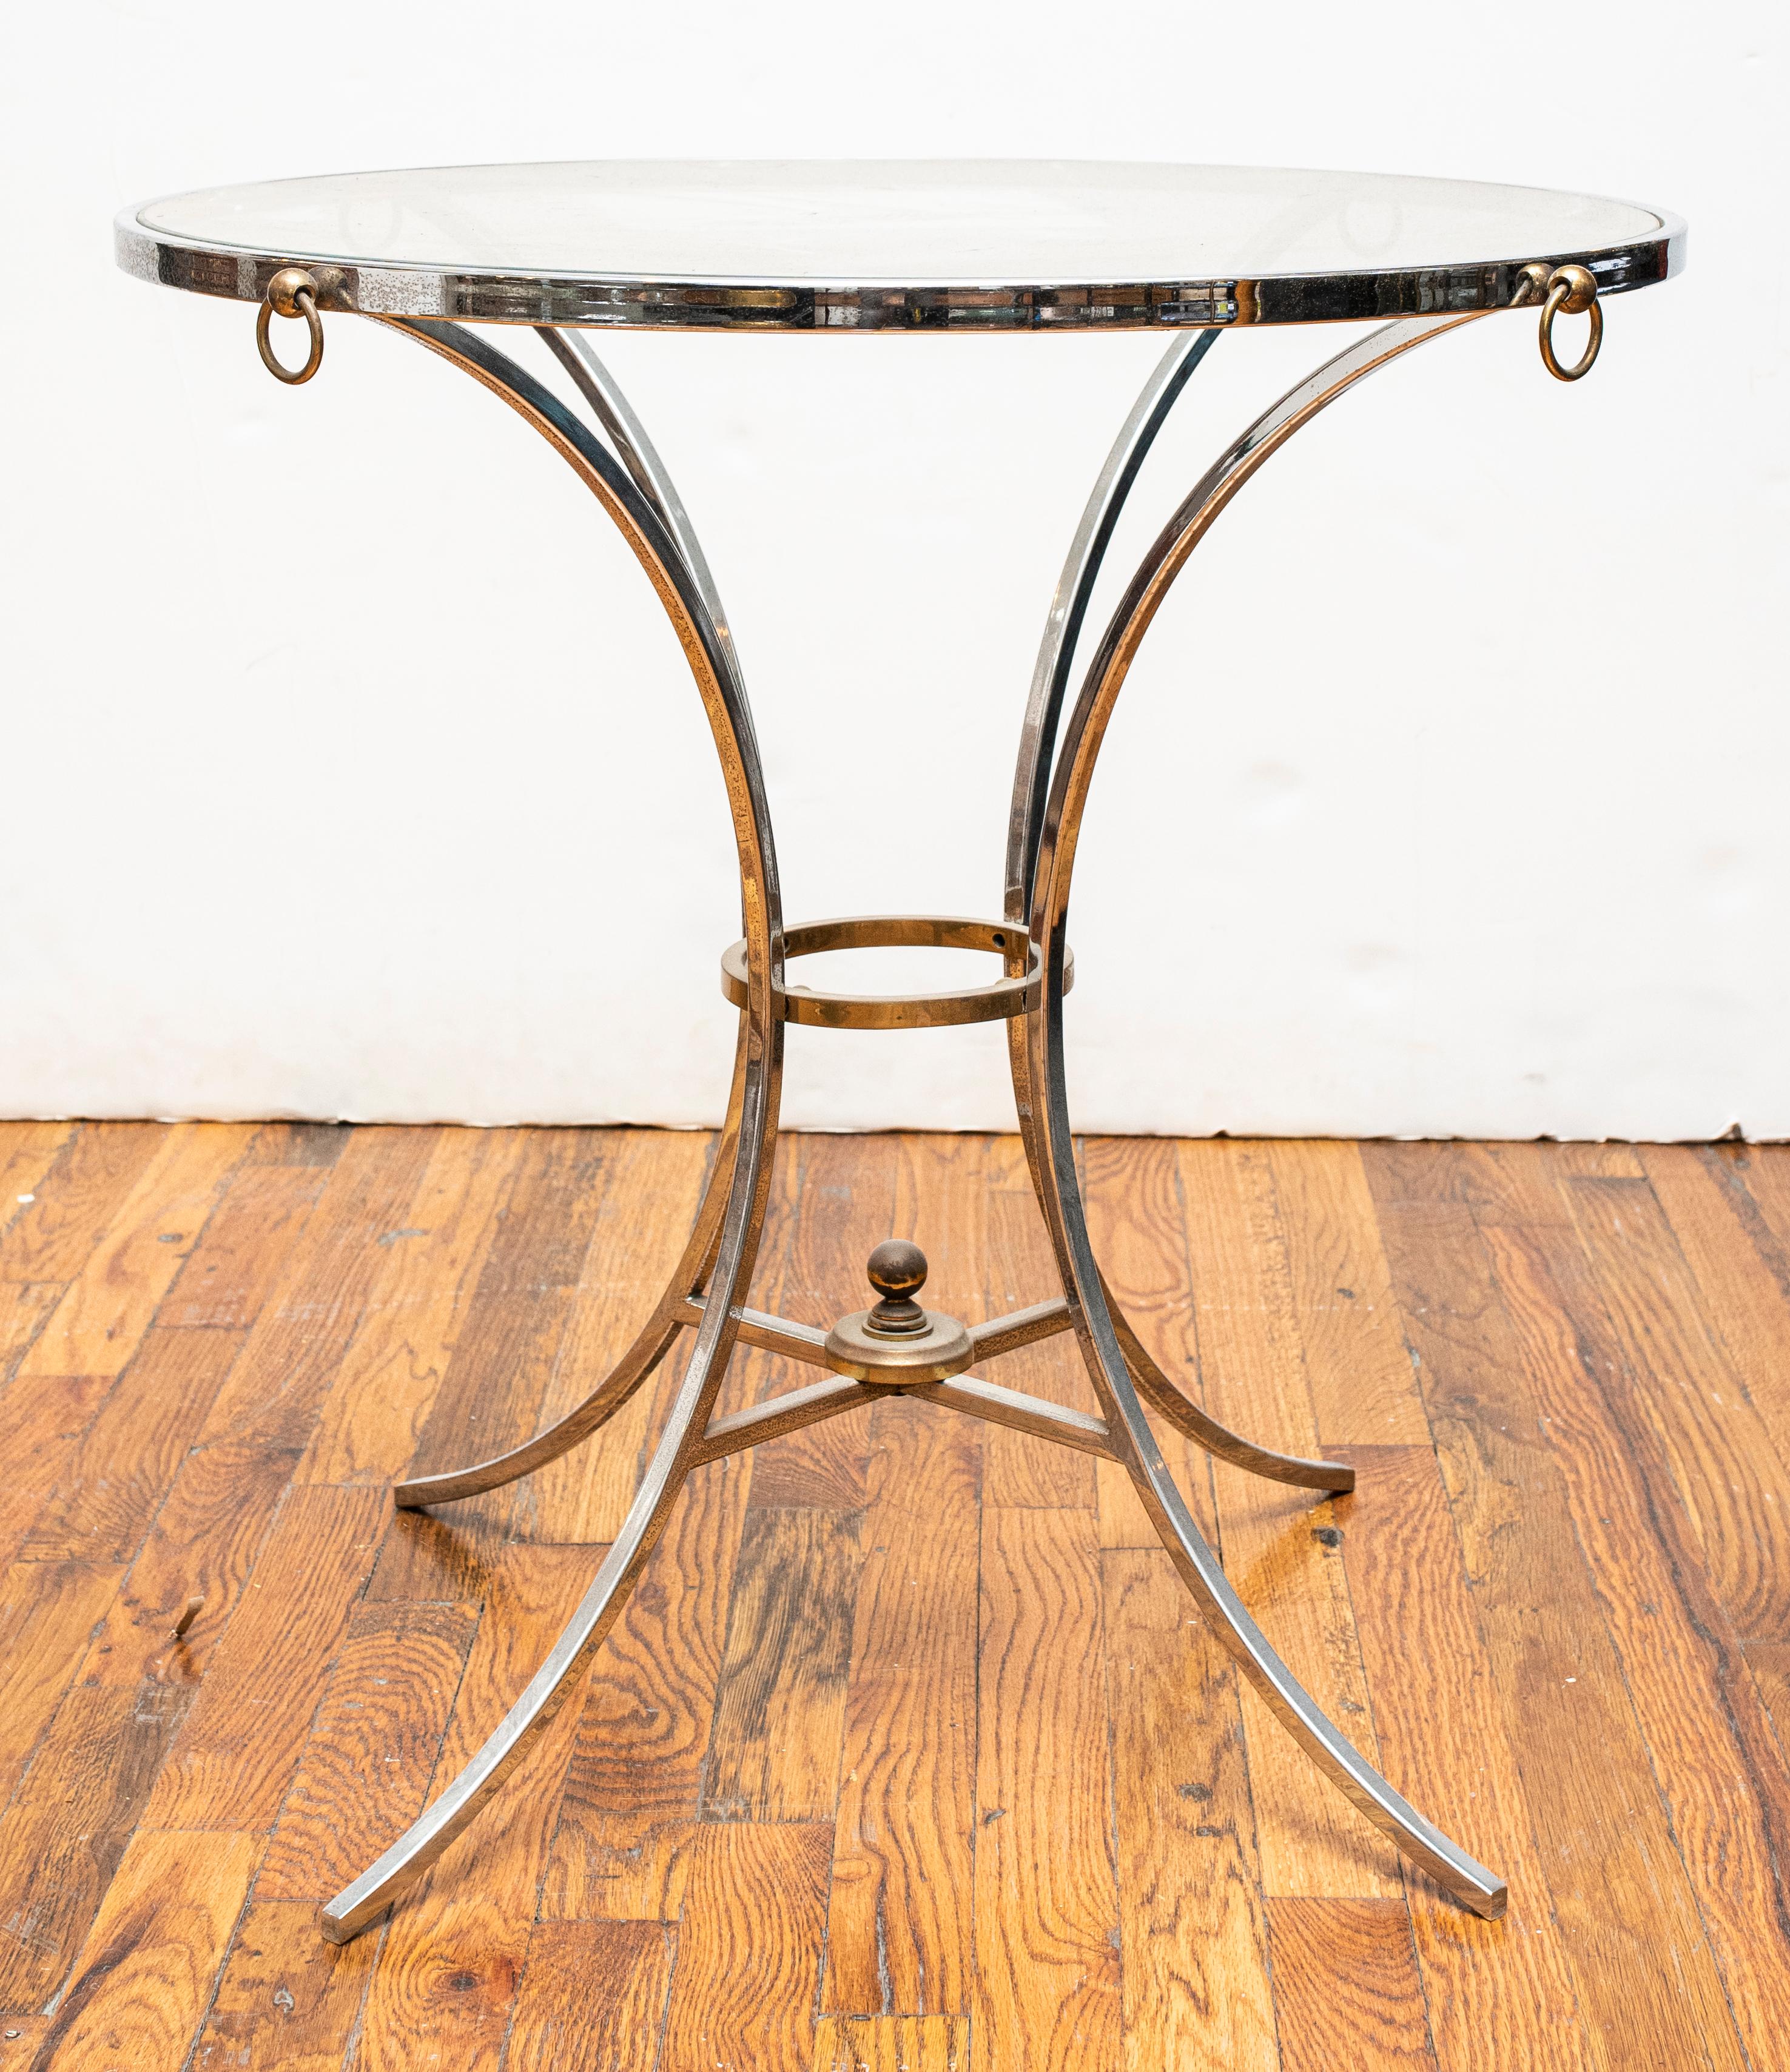 Maison Jansen style chromed metal gueridon side table with round glass top. Measures: 26.5